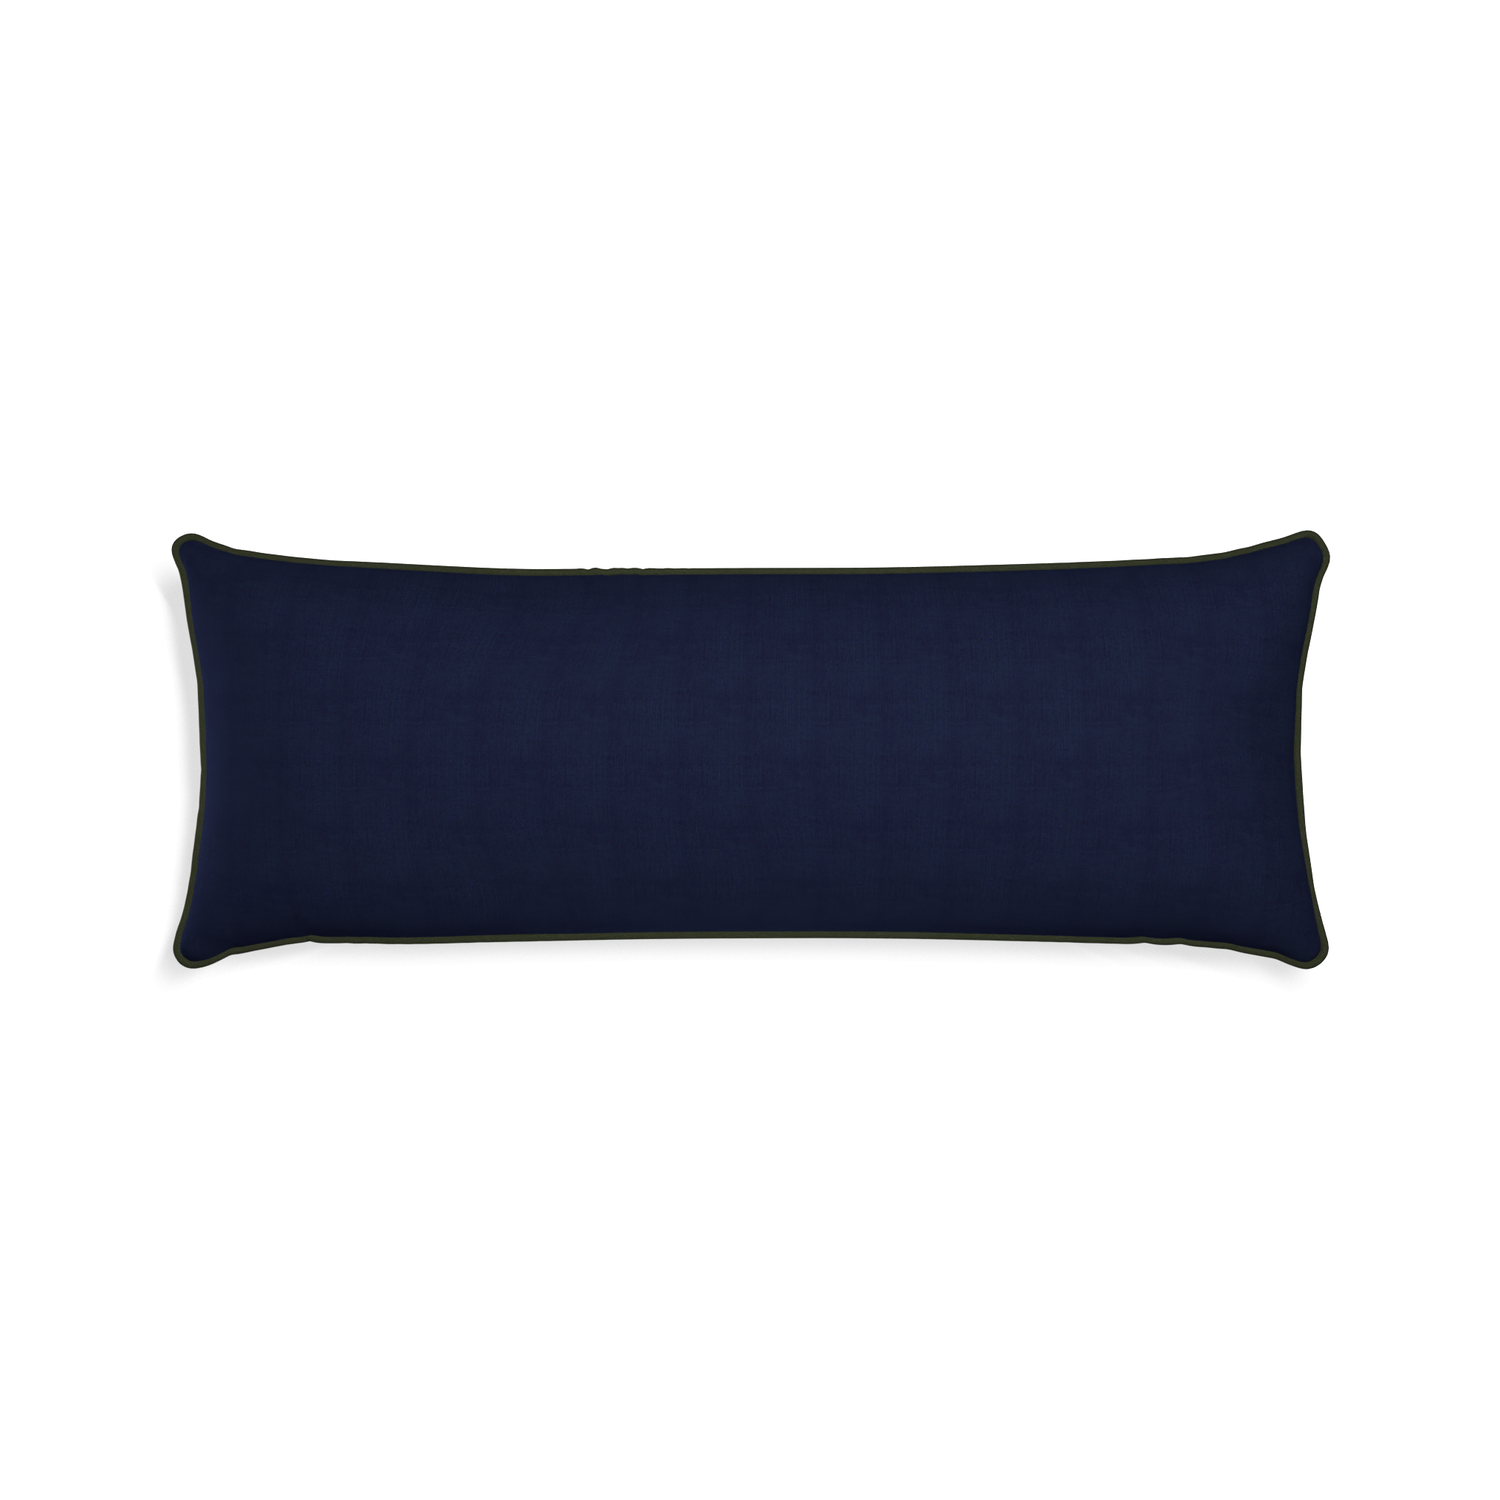 Xl-lumbar midnight custom navy bluepillow with f piping on white background